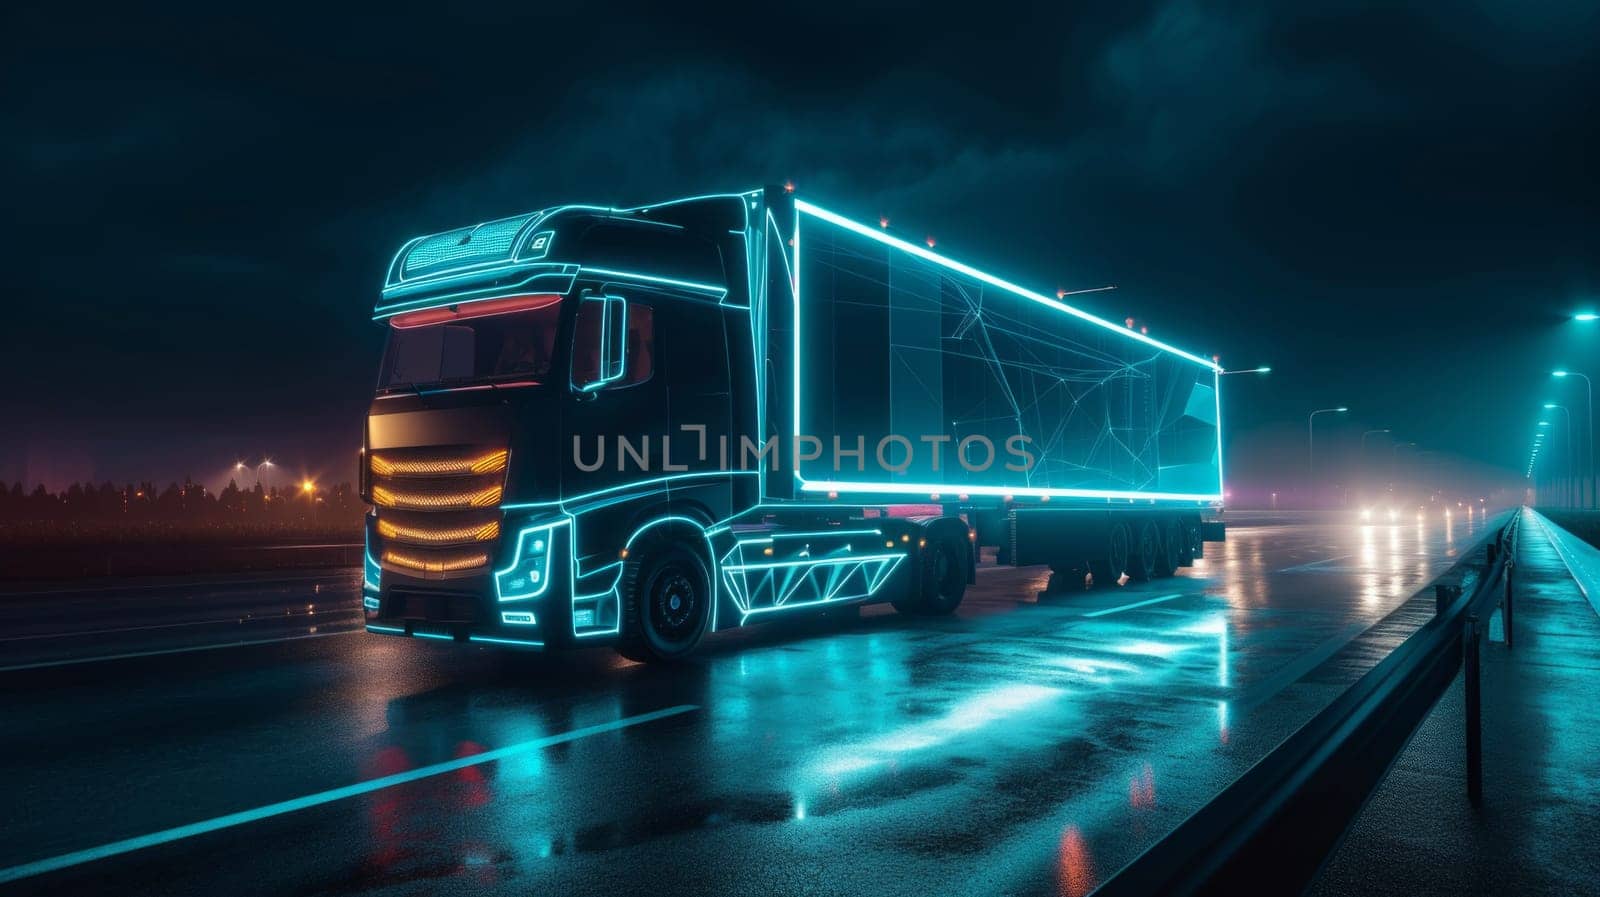 Futuristic cargo truck in blue lights on highway at night. Electric and sustainable transport concept by papatonic